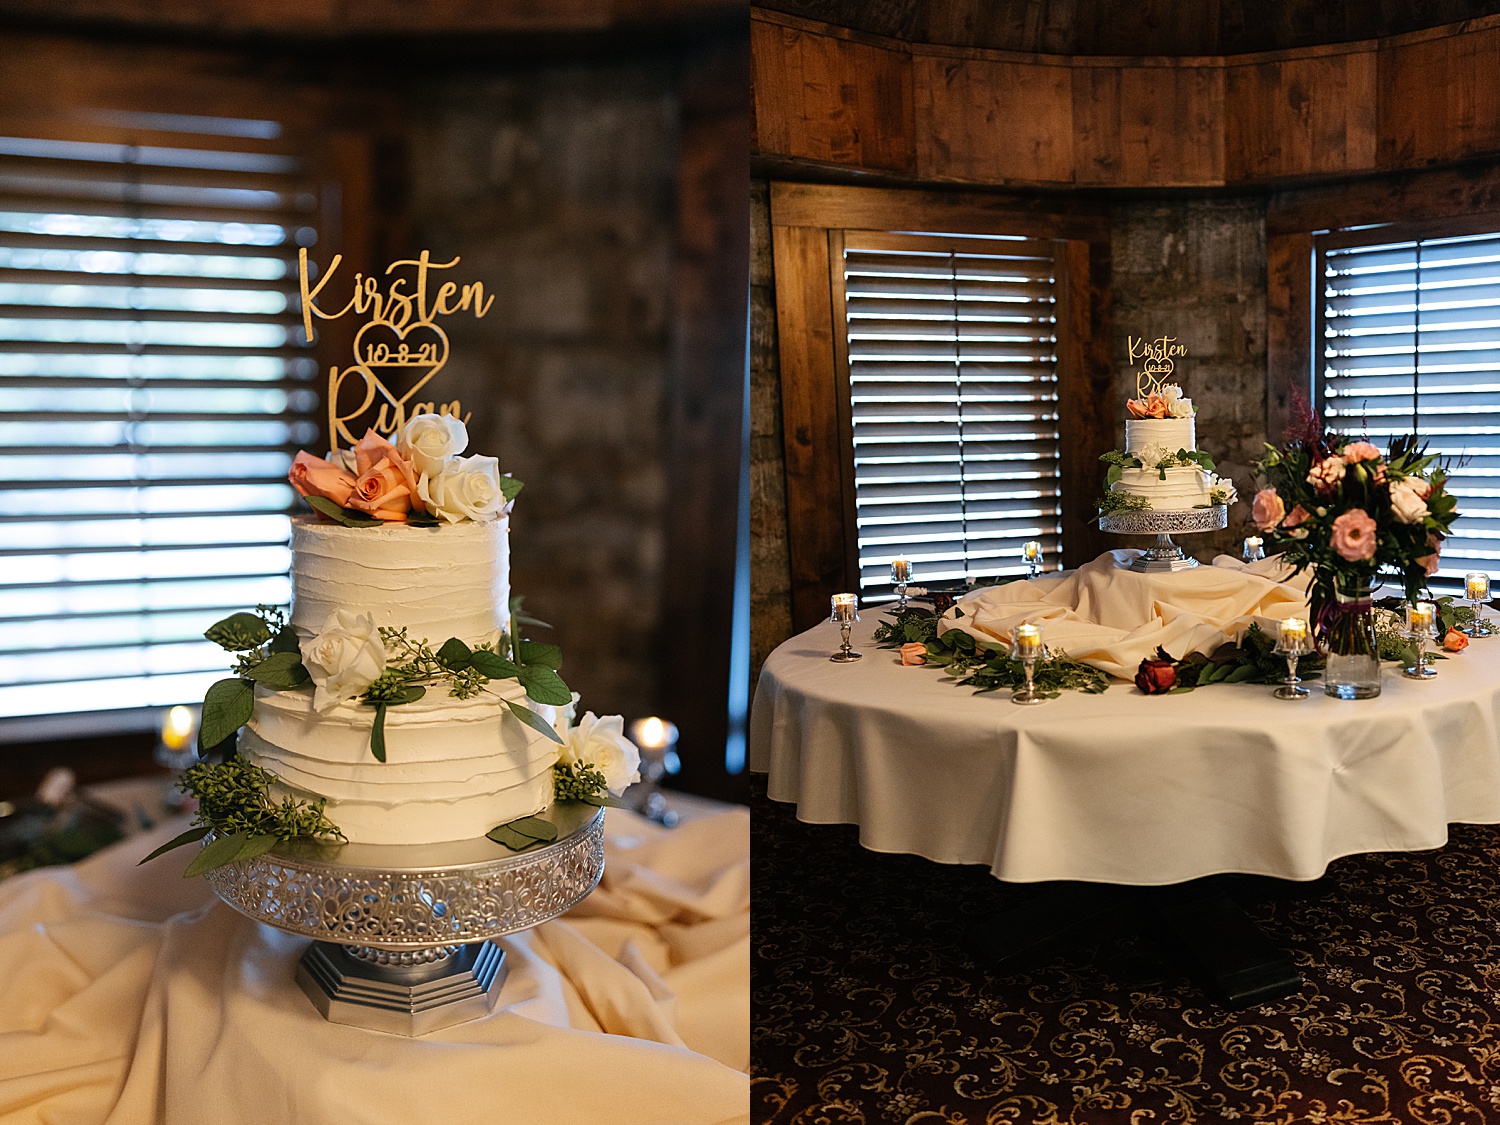 Wedding cake with name topper and white and green florals to accent dessert table